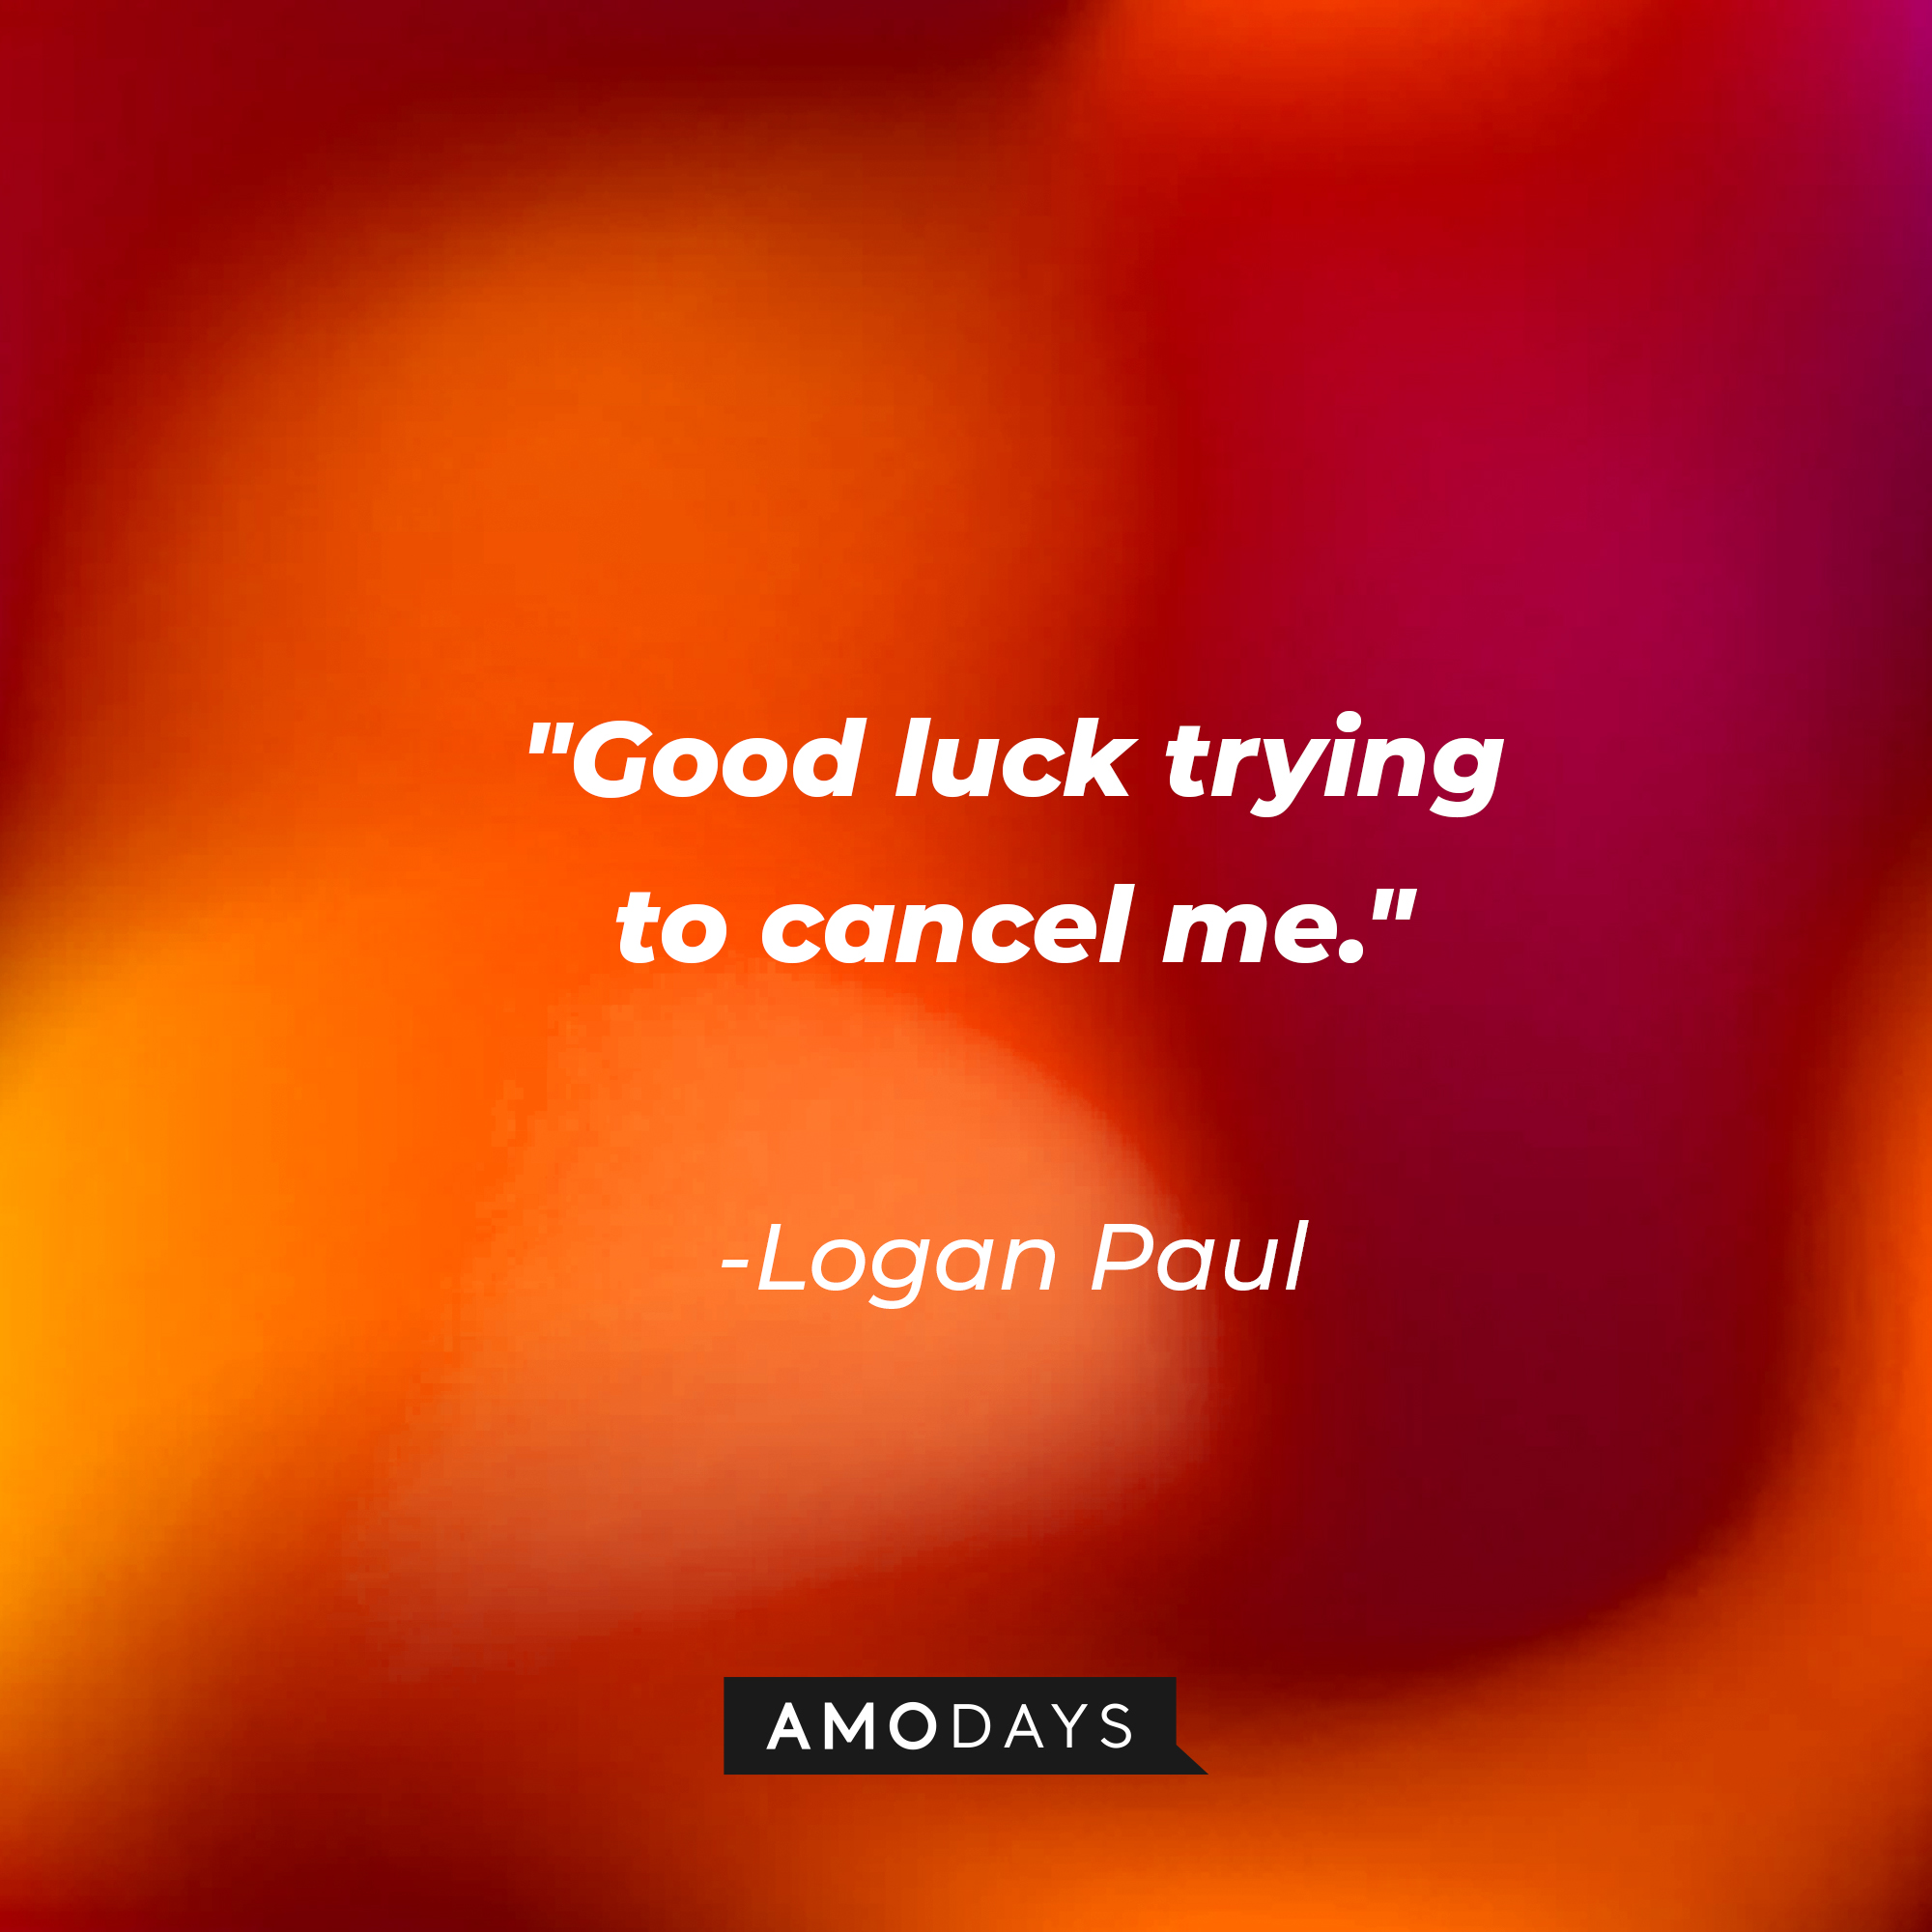 Logan Paul's quote: "Good luck trying to cancel me." | Source: AmoDays